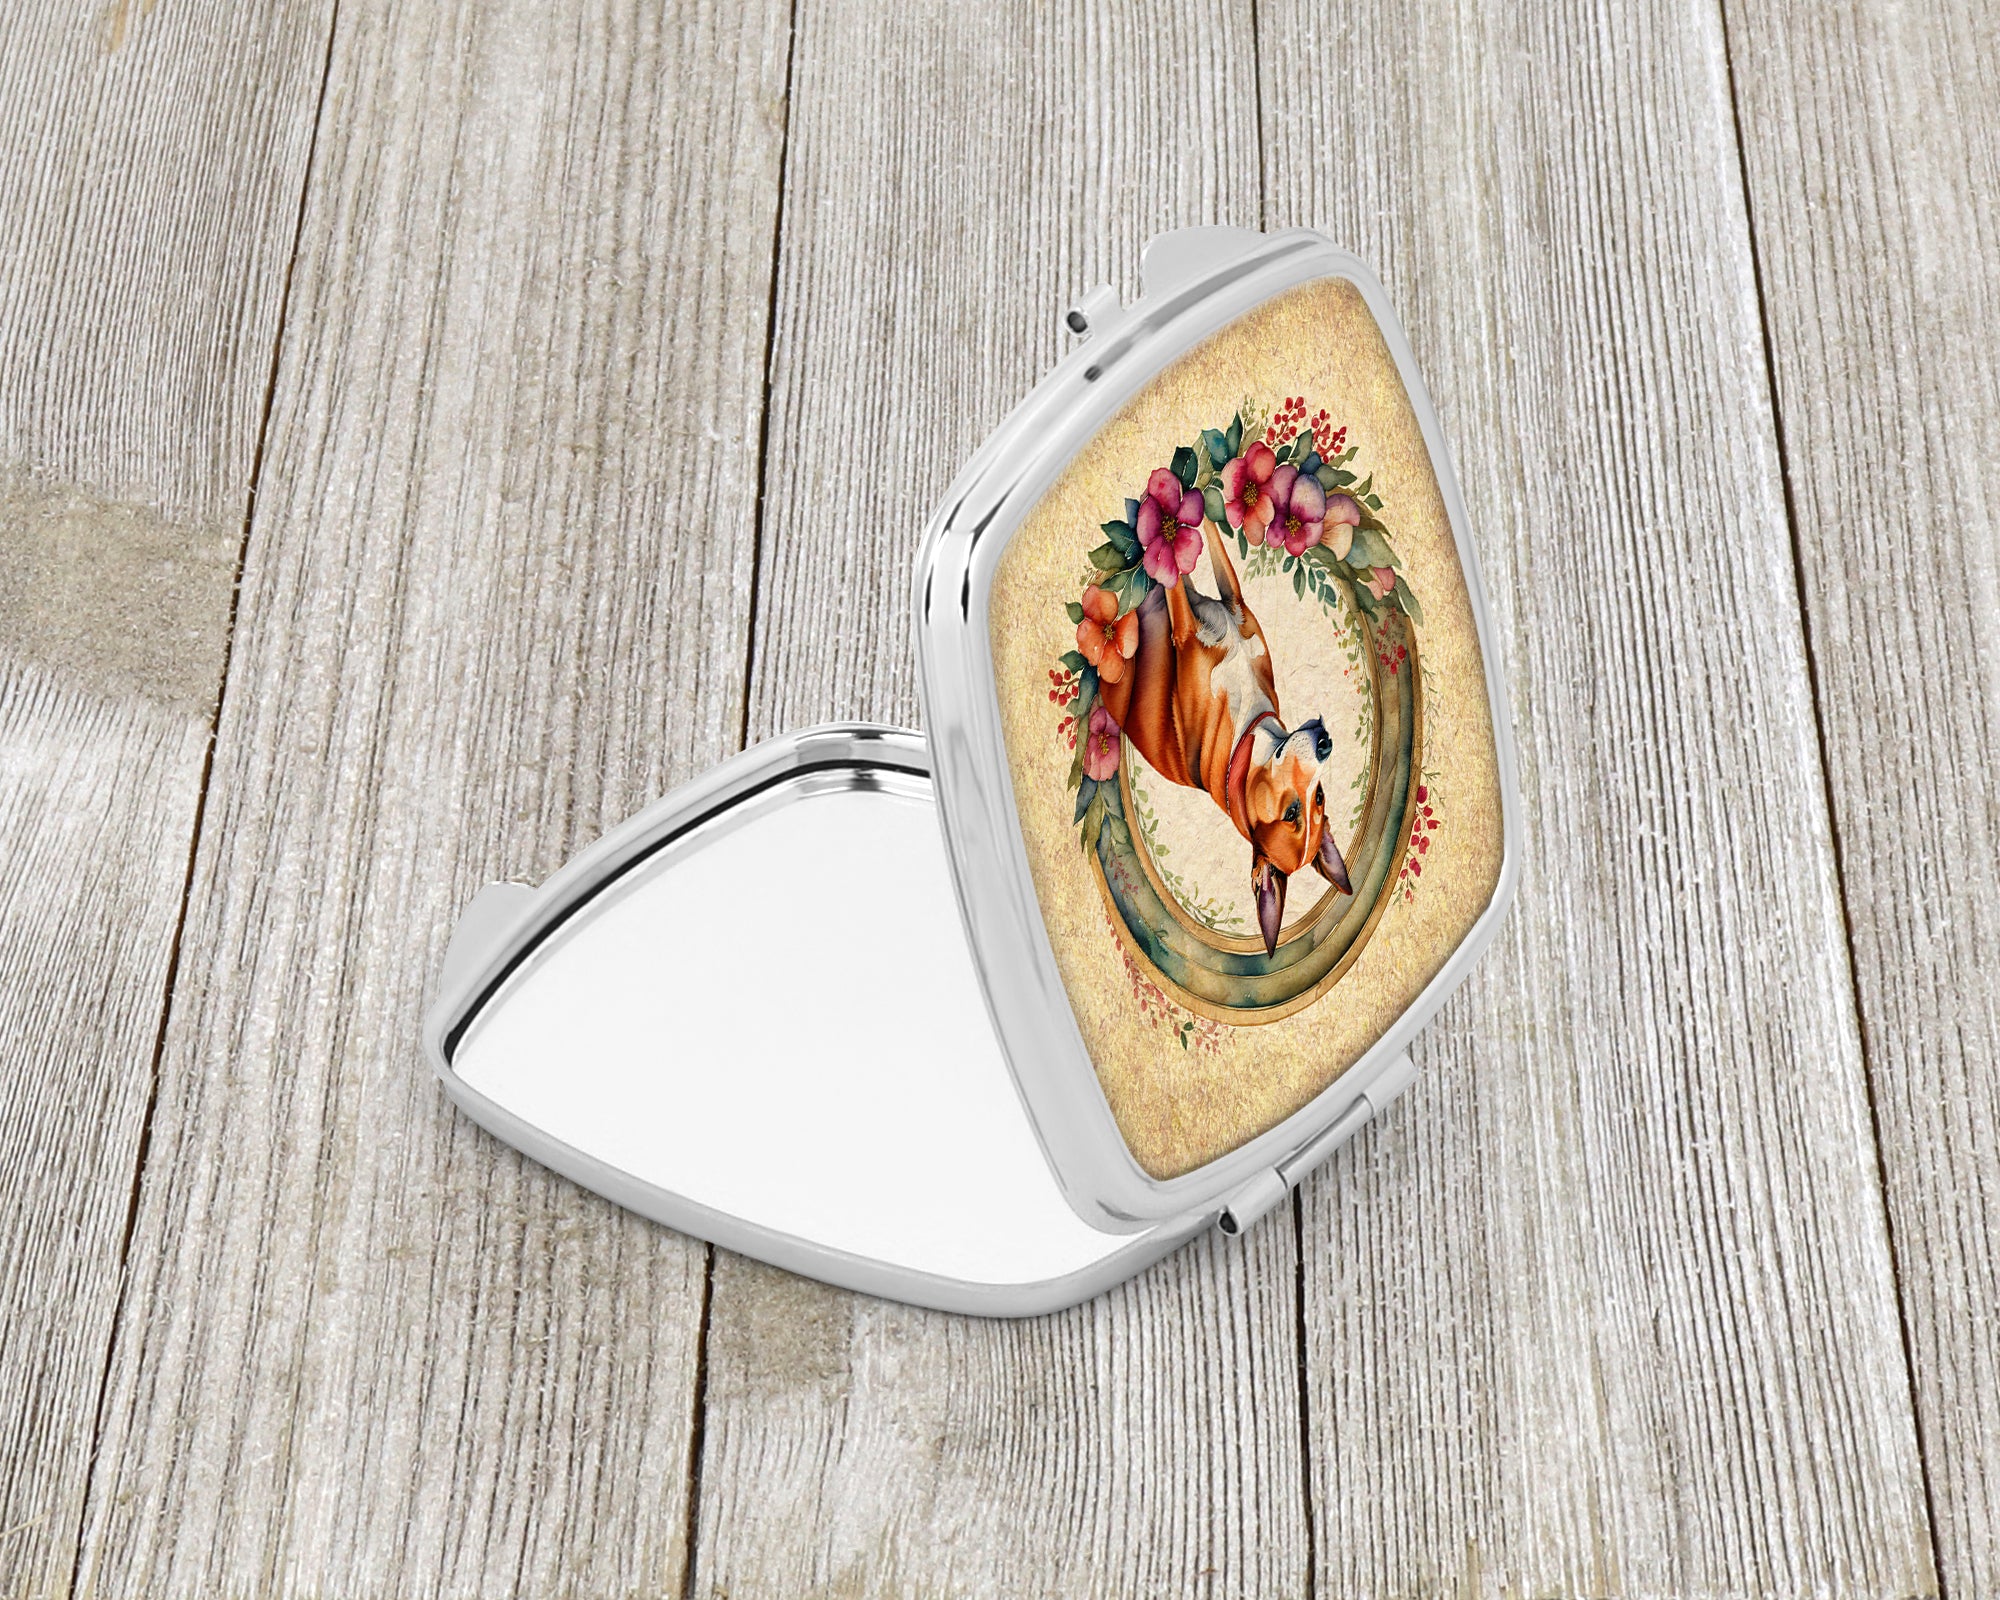 Basenji and Flowers Compact Mirror